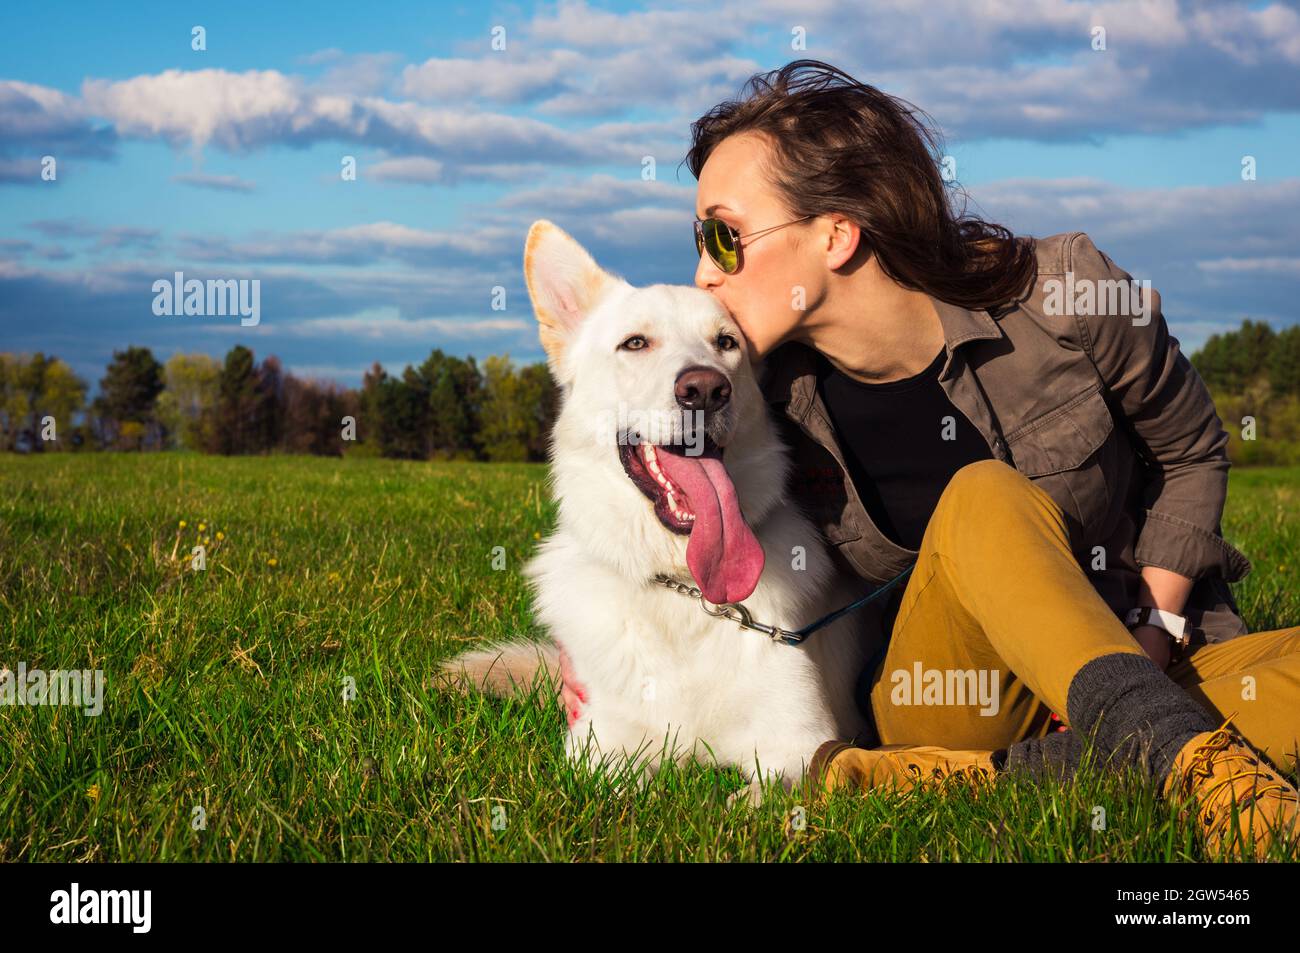 Young Attractive Girl With Her Pet Dog, Colorised Image Stock Photo